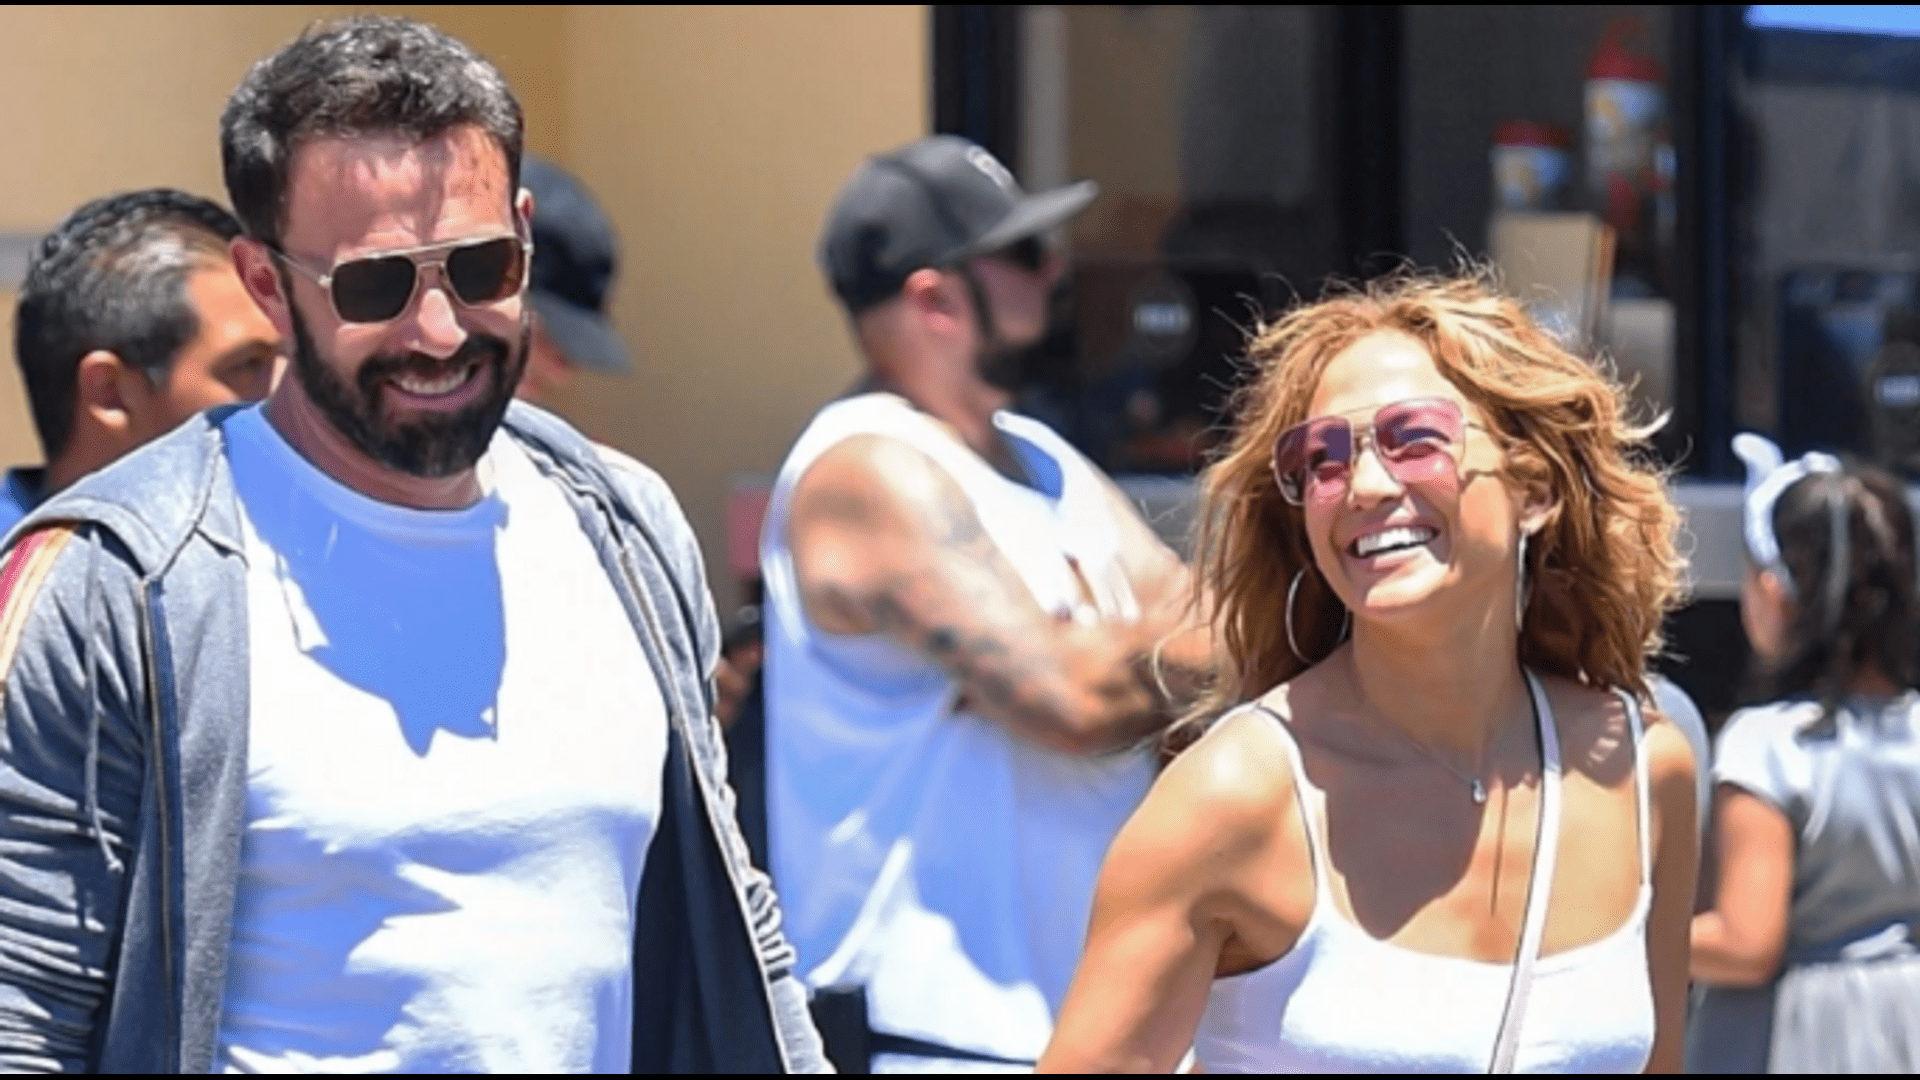 Jennifer Lopez and Ben Affleck plan to redecorate their new Bel Air mansion